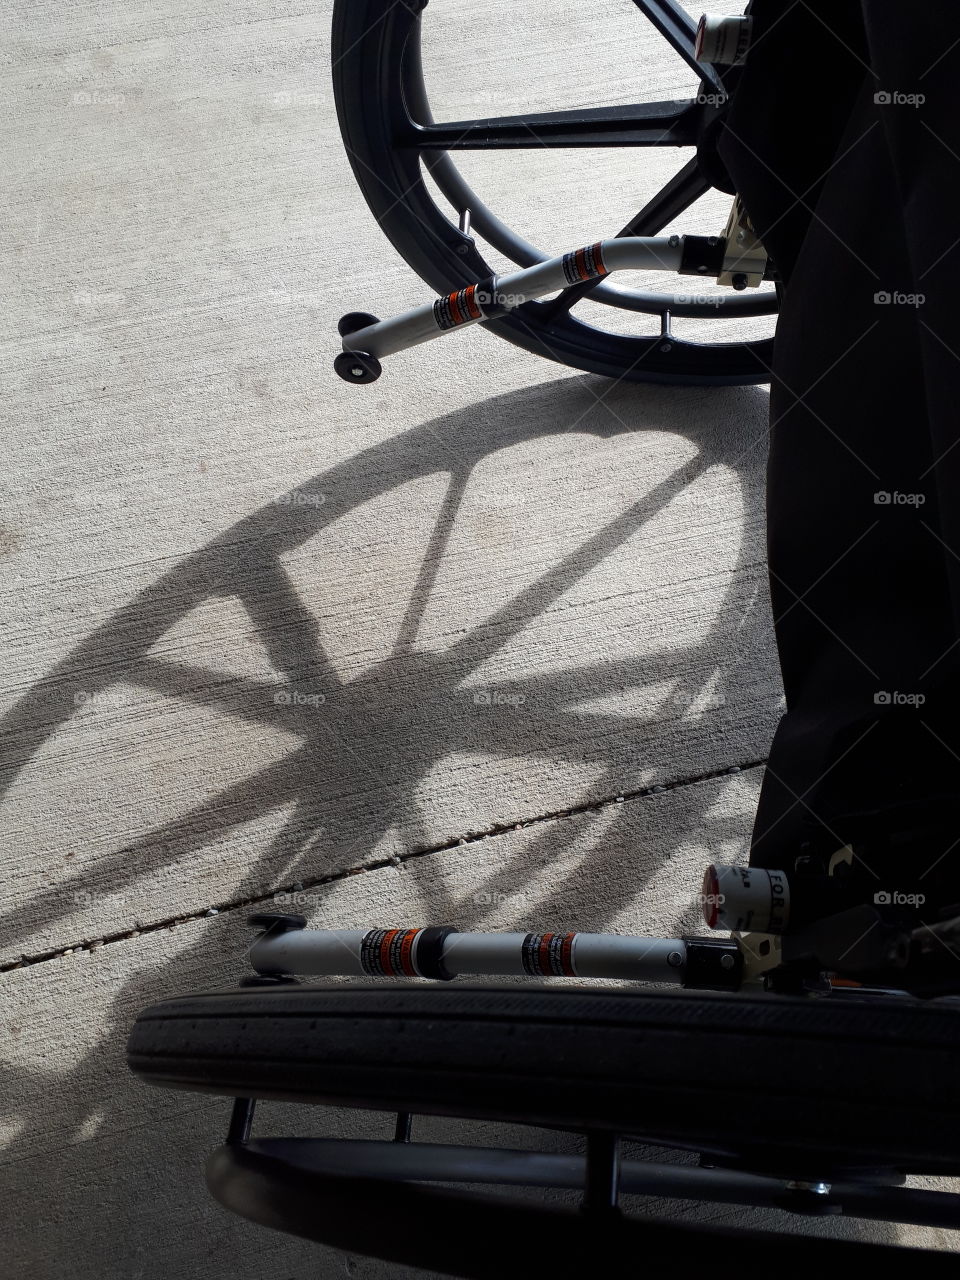 A wheelchair casting shadows of it's wheels along the street on the sidewalk in town.